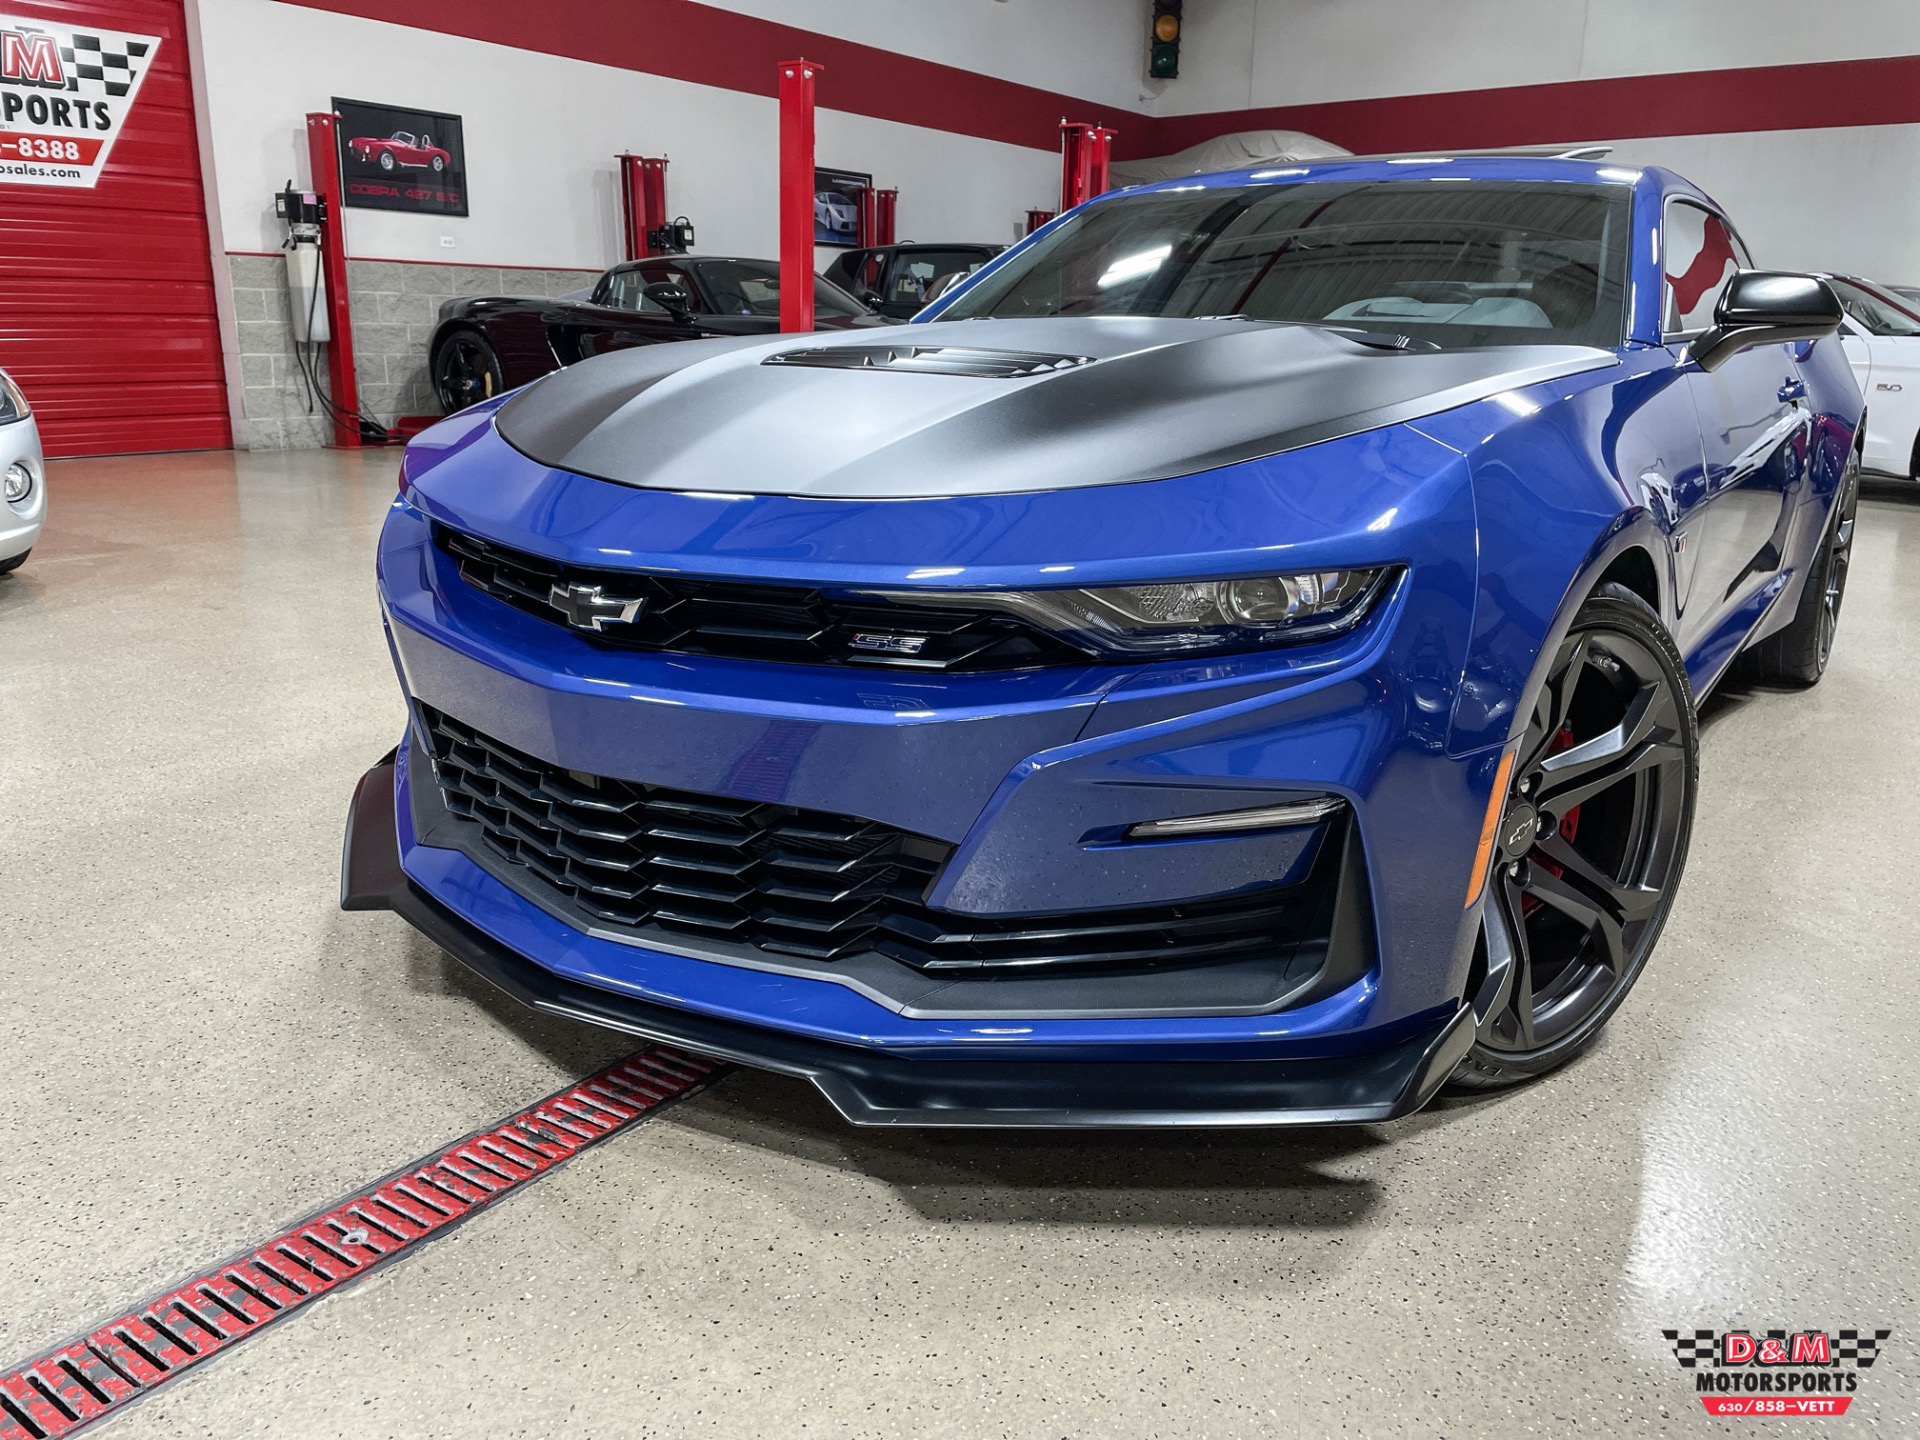 Used 2020 Chevrolet Camaro 2SS 1LE Coupe | Glen Ellyn, IL